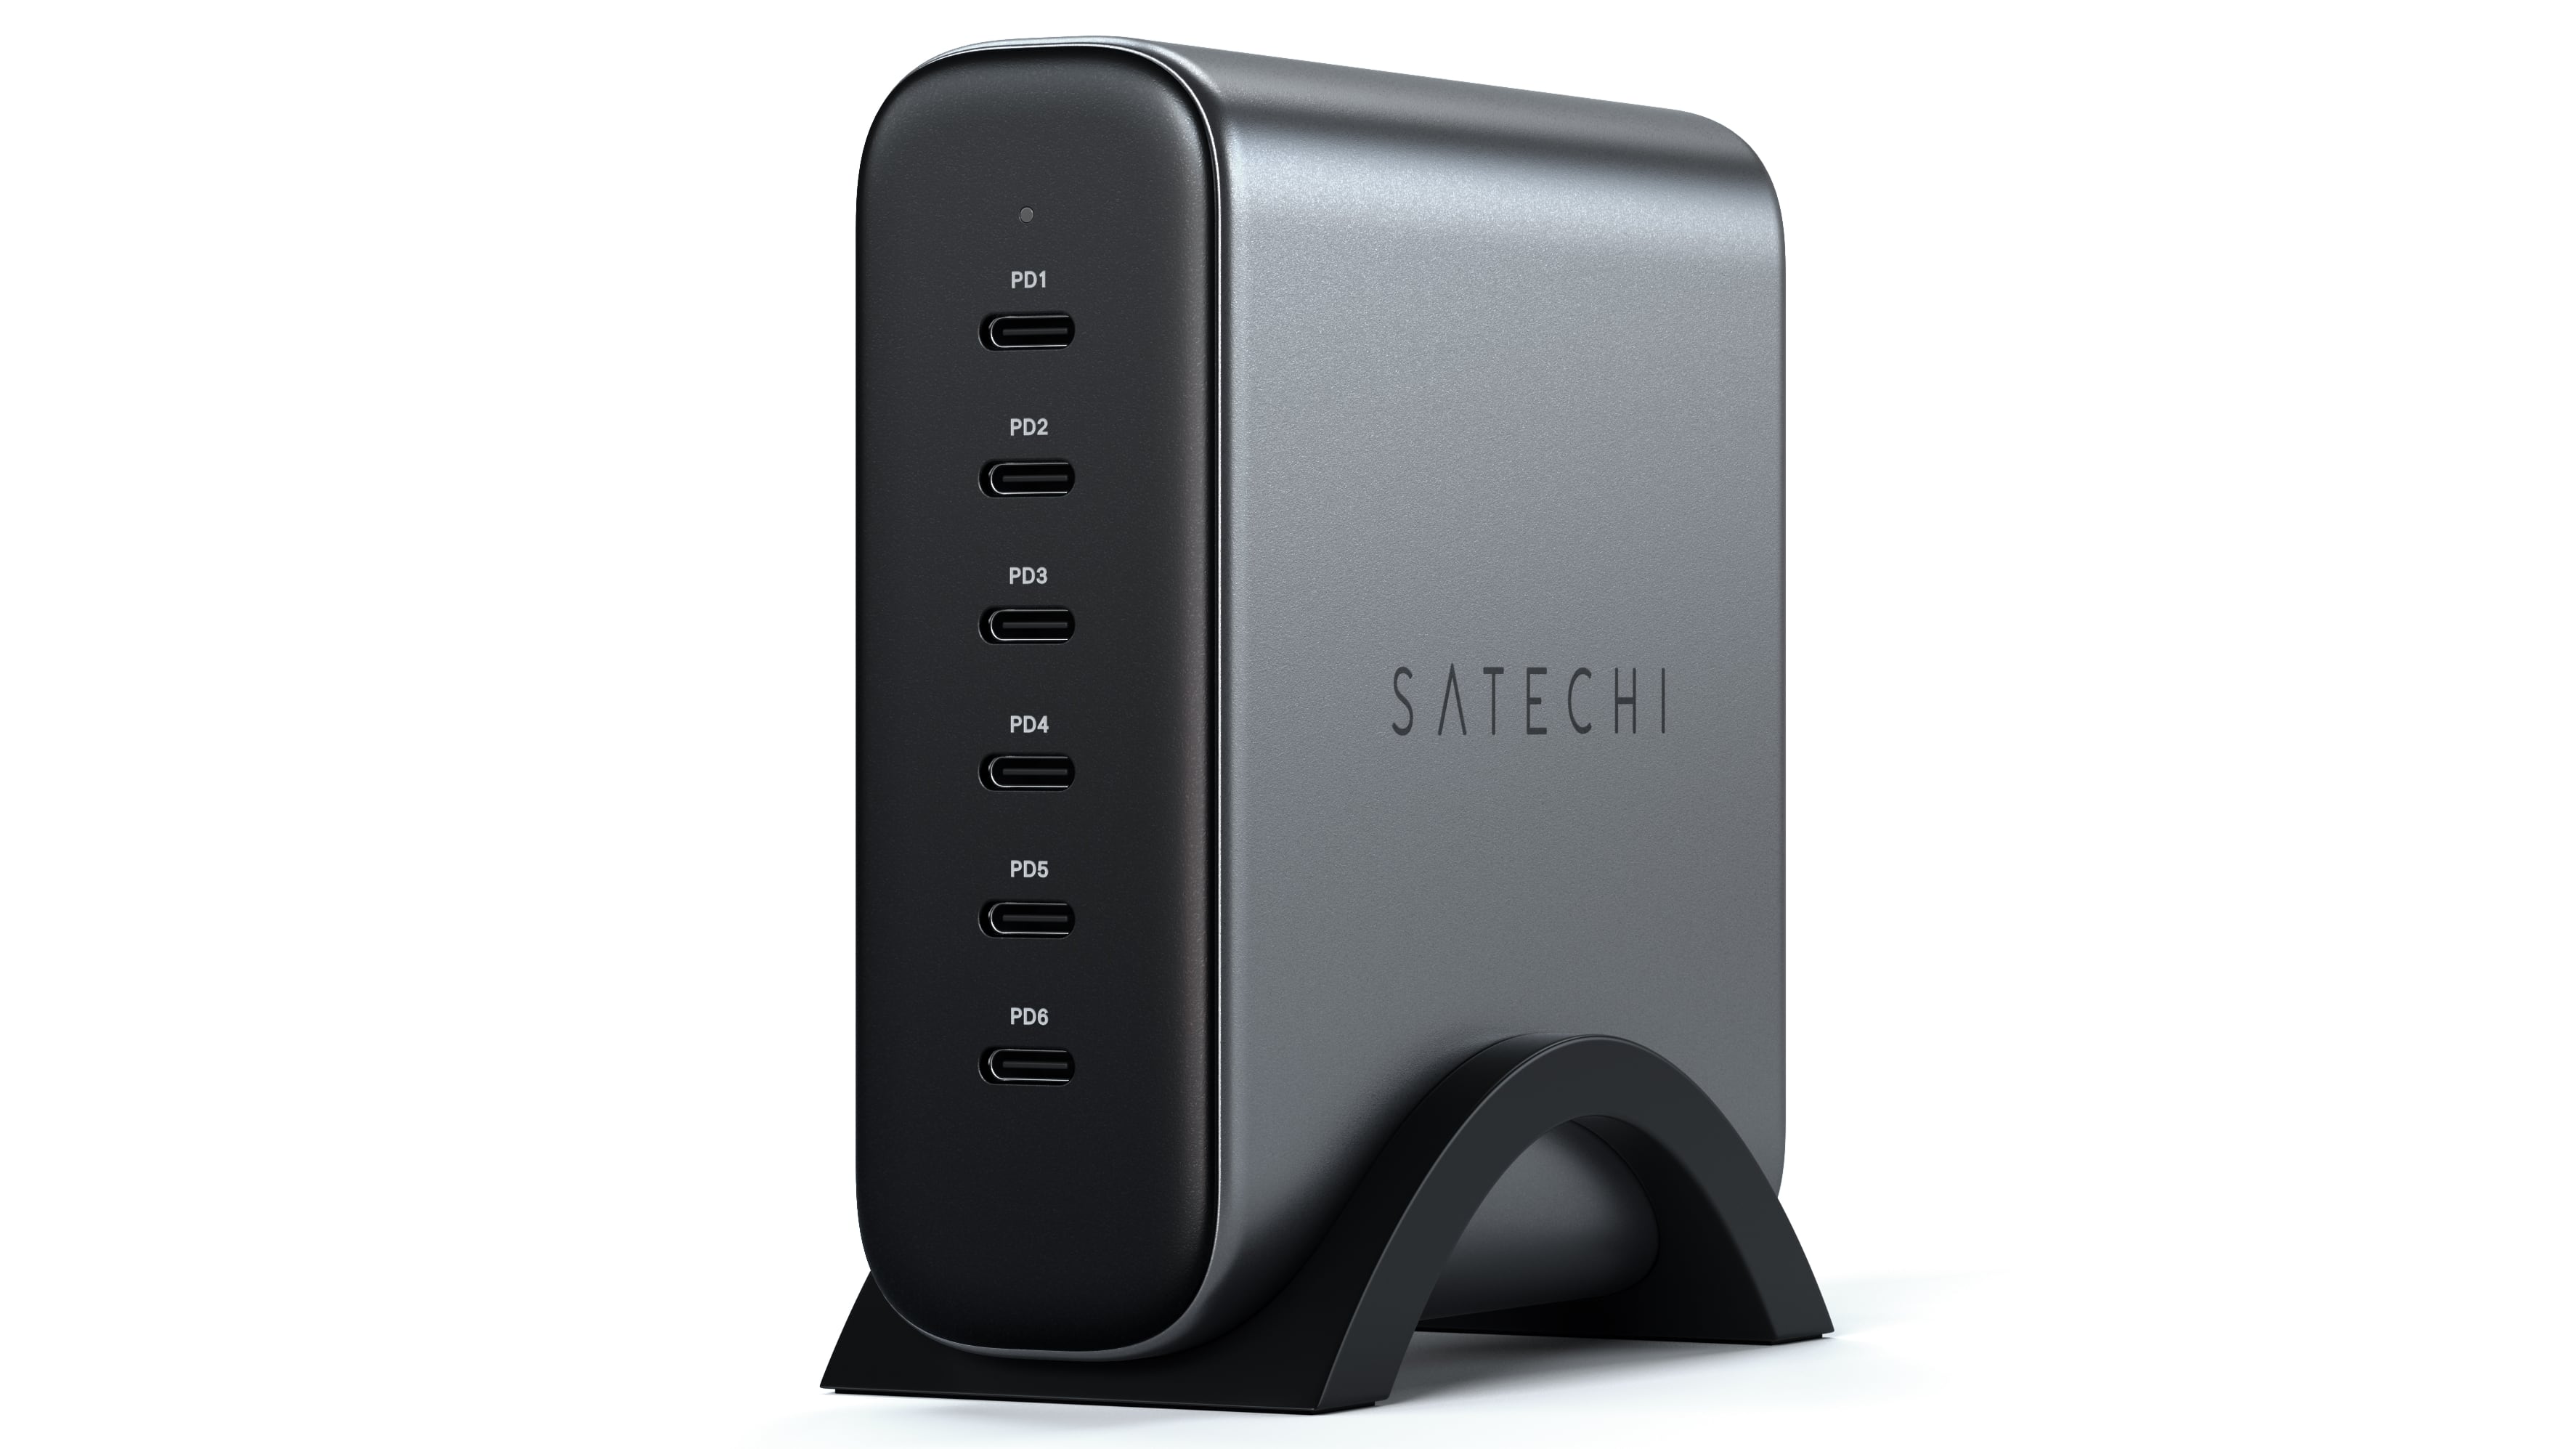 Satechi's six-port GaN charger positioned upright in its desktop stand